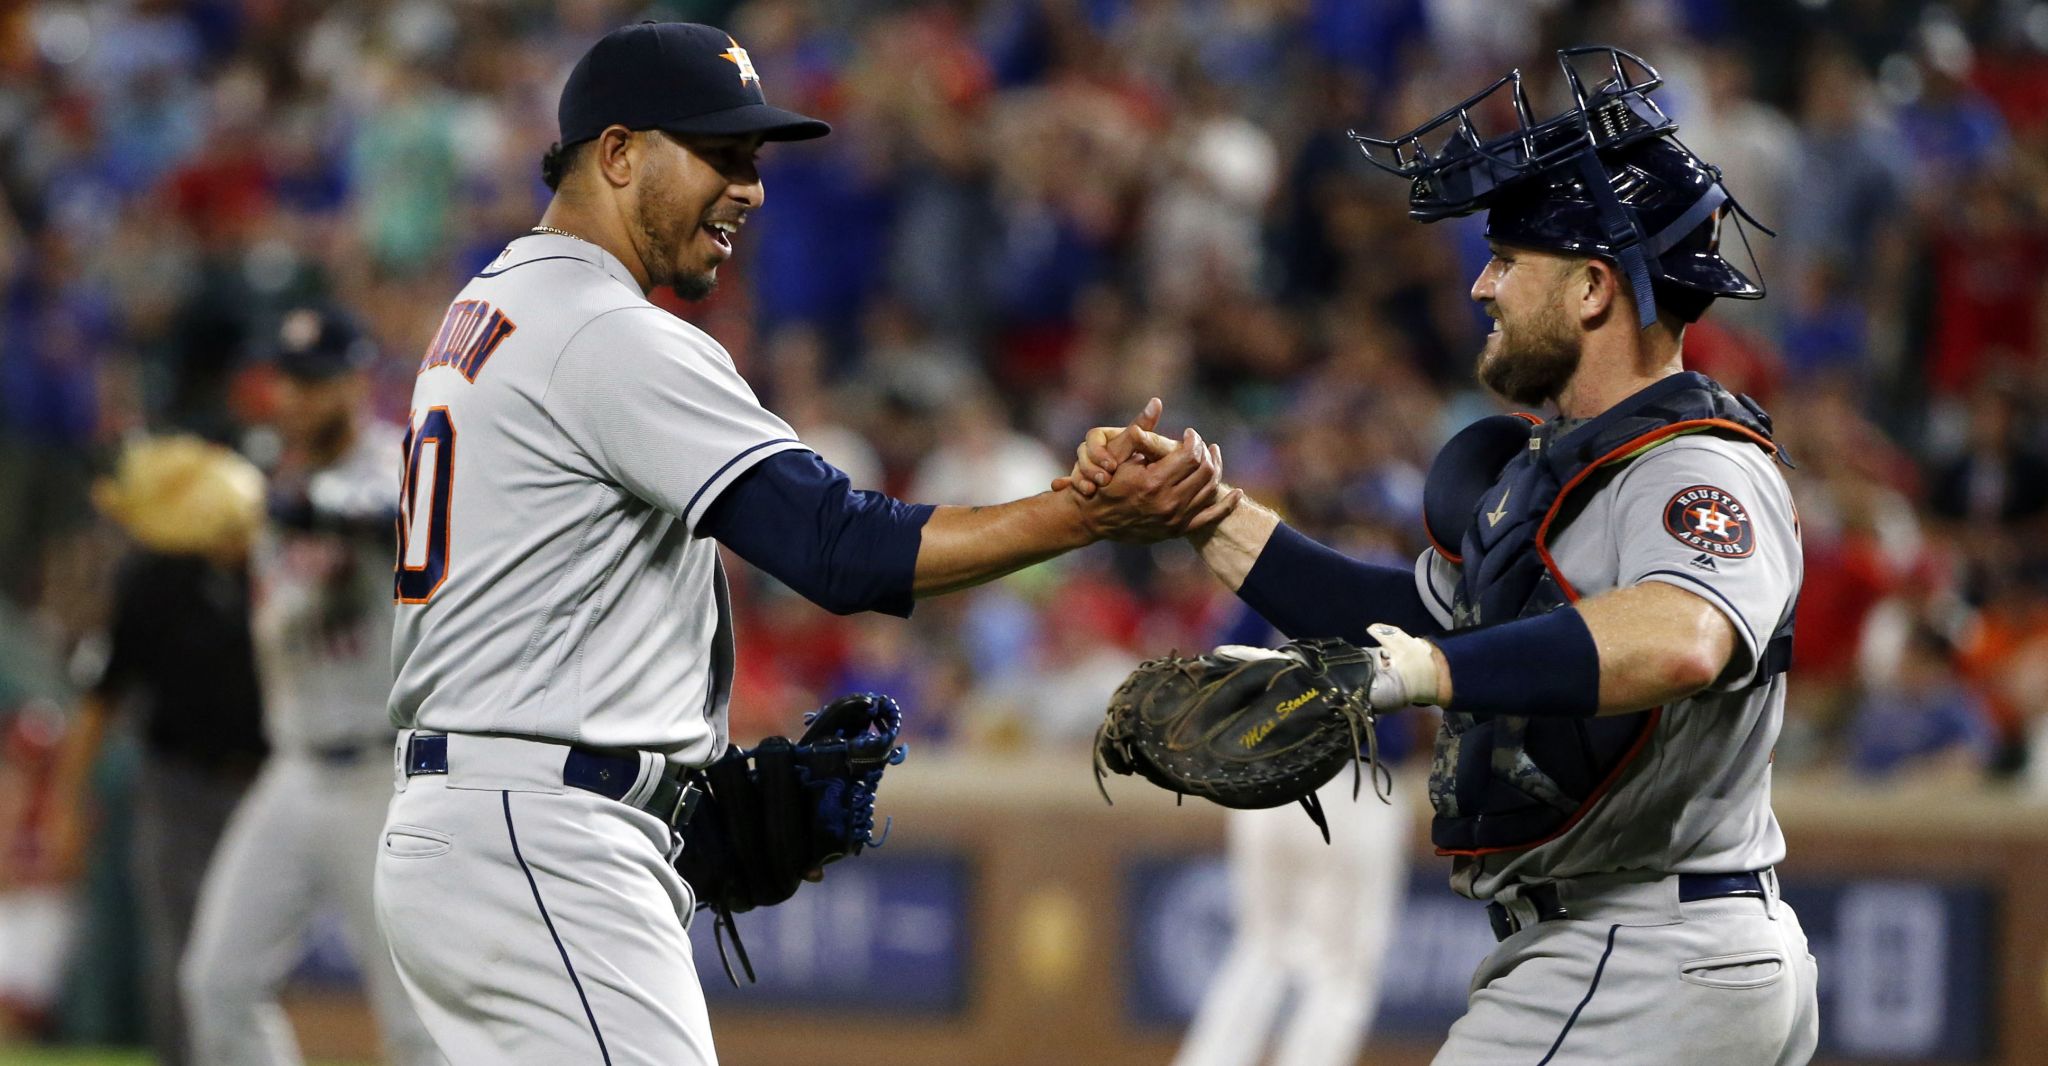 Astros pick up messy win over Rangers, clinch series.